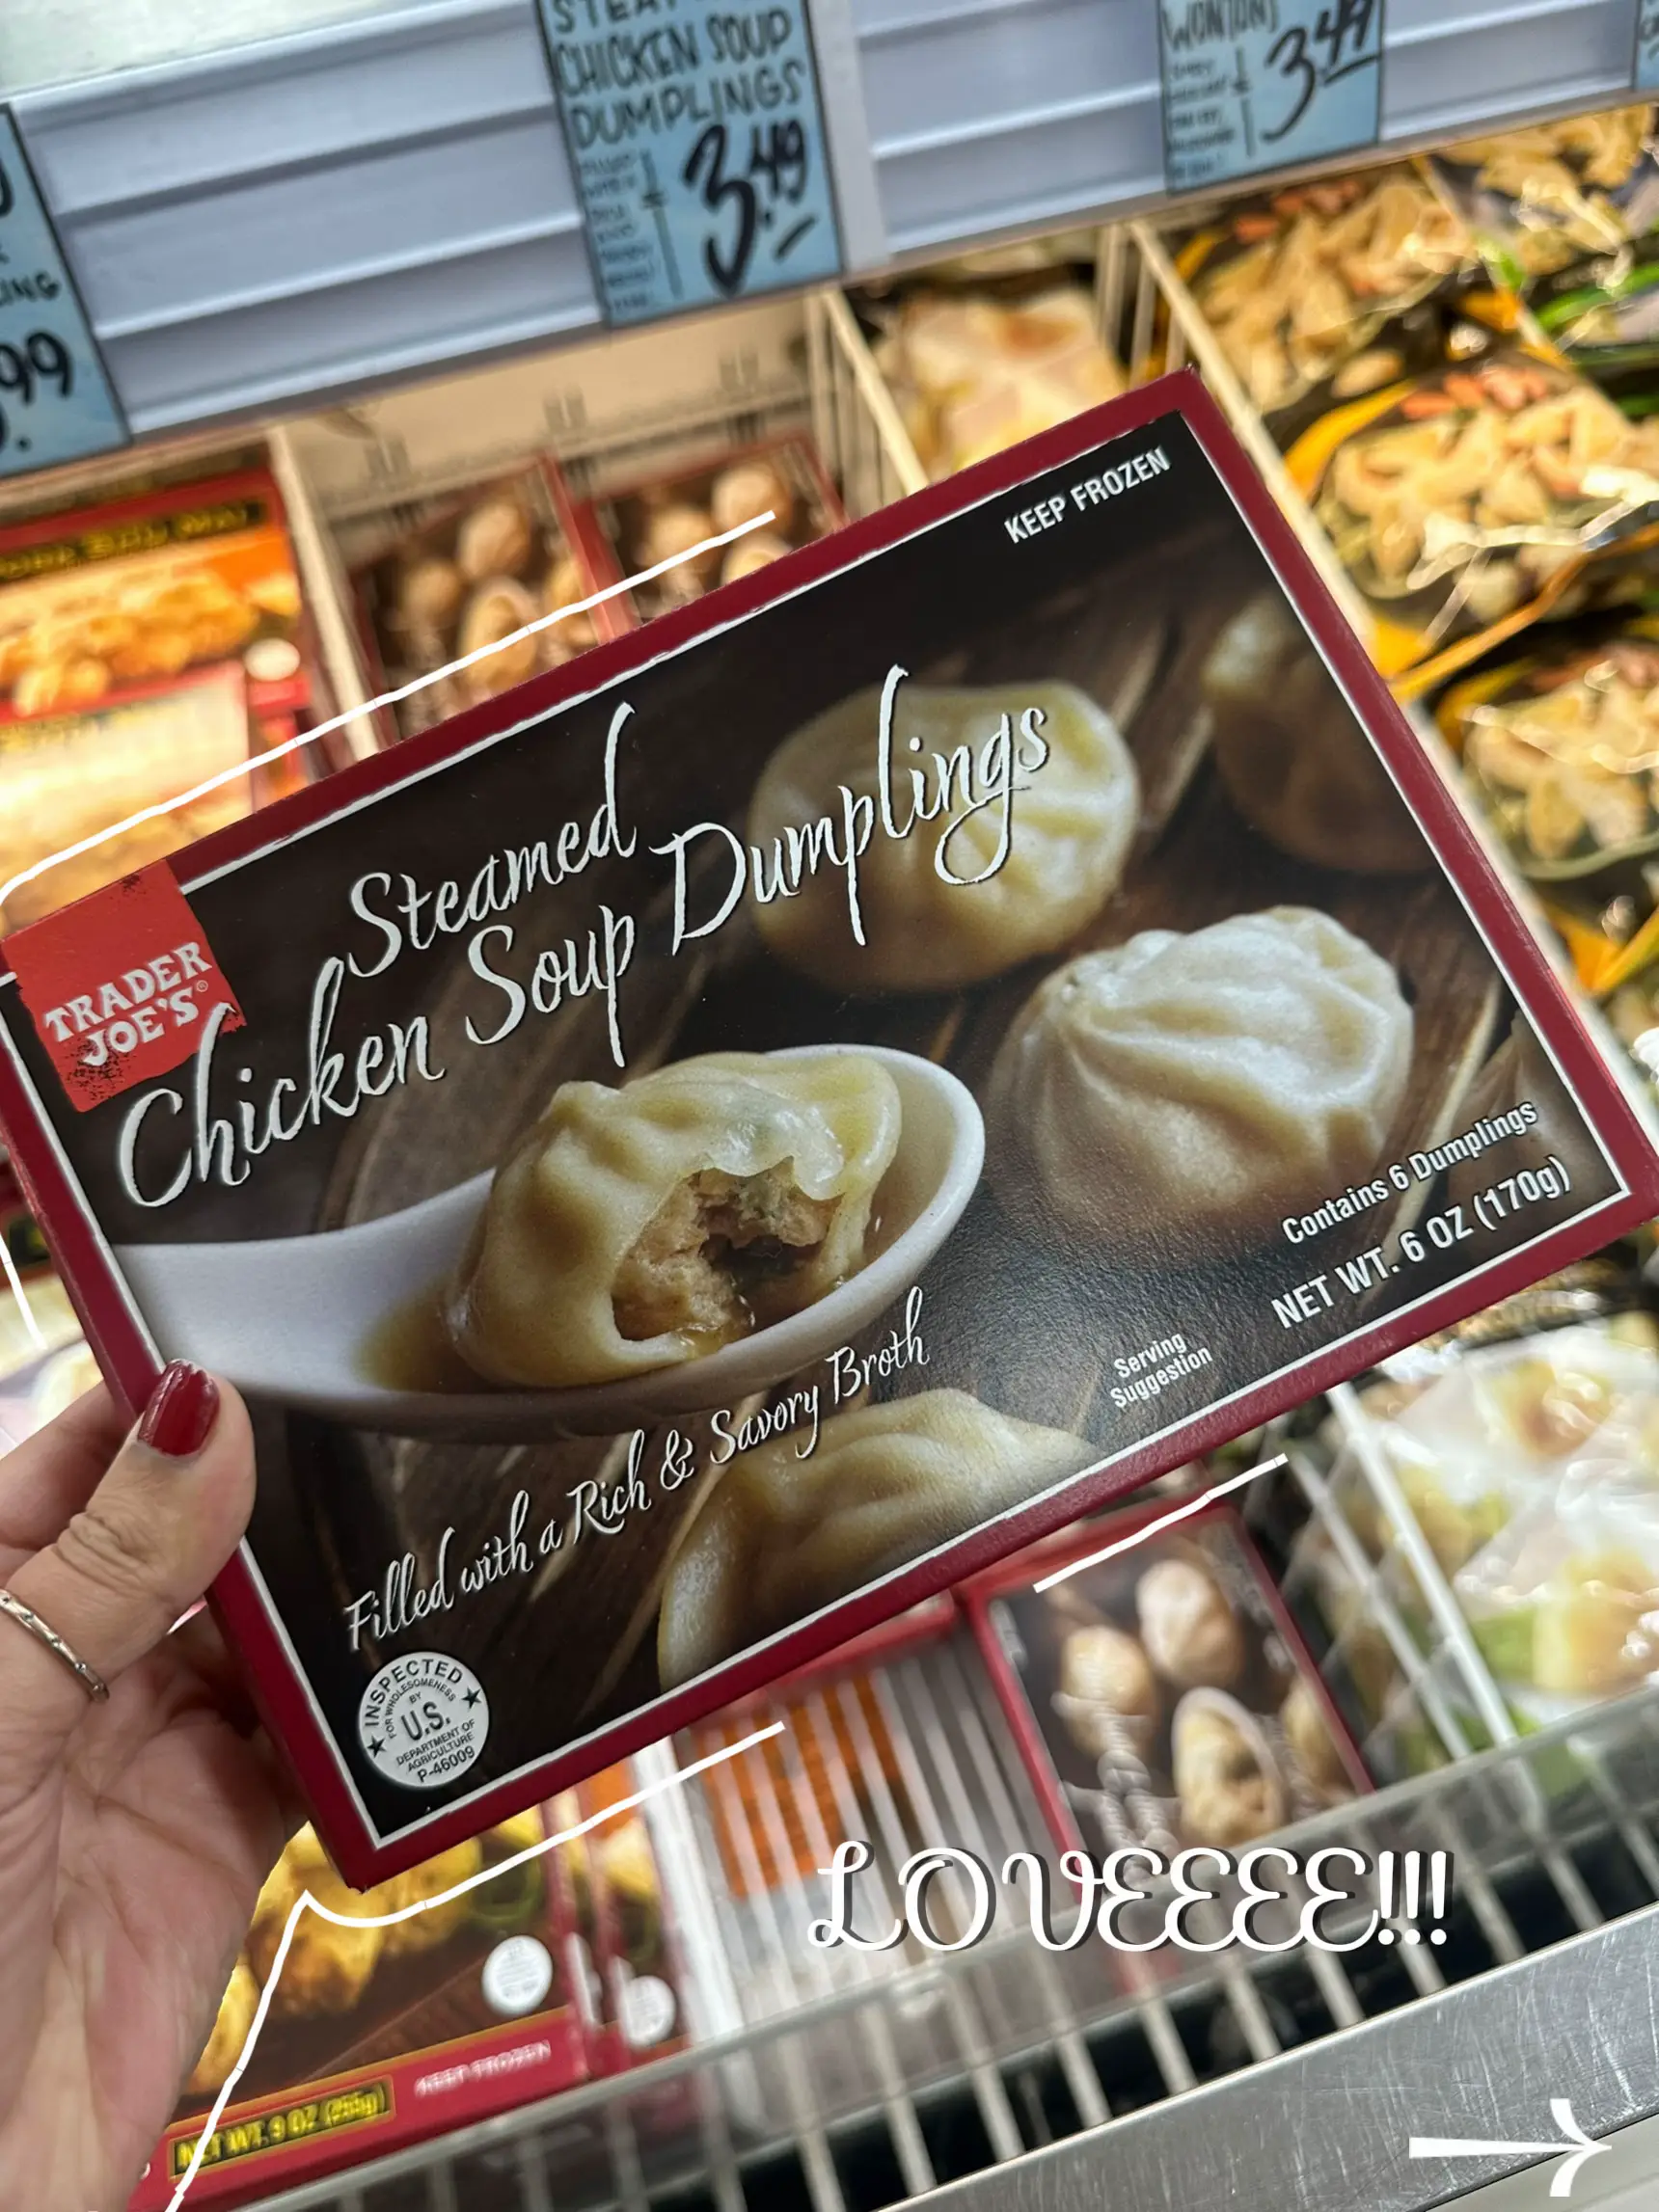 Trader Joe's Steamed Chicken Soup Dumplings (Pack of 8) - Frozen White  Chicken Meat Filled with a Rich and Savory Broth - Delicious Frozen Meal 